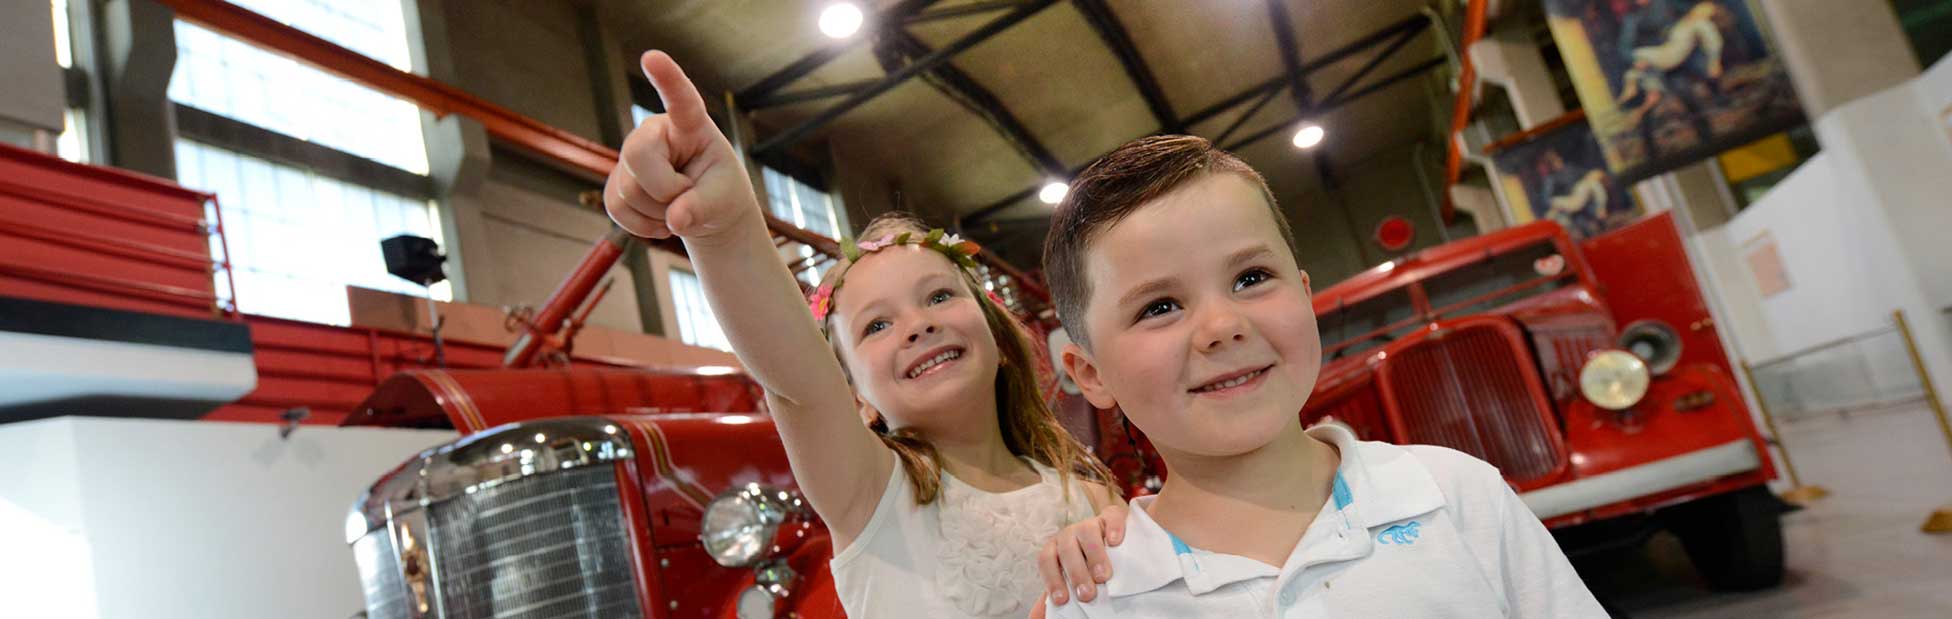 Two young kids standing in front of vintage red fire trucks